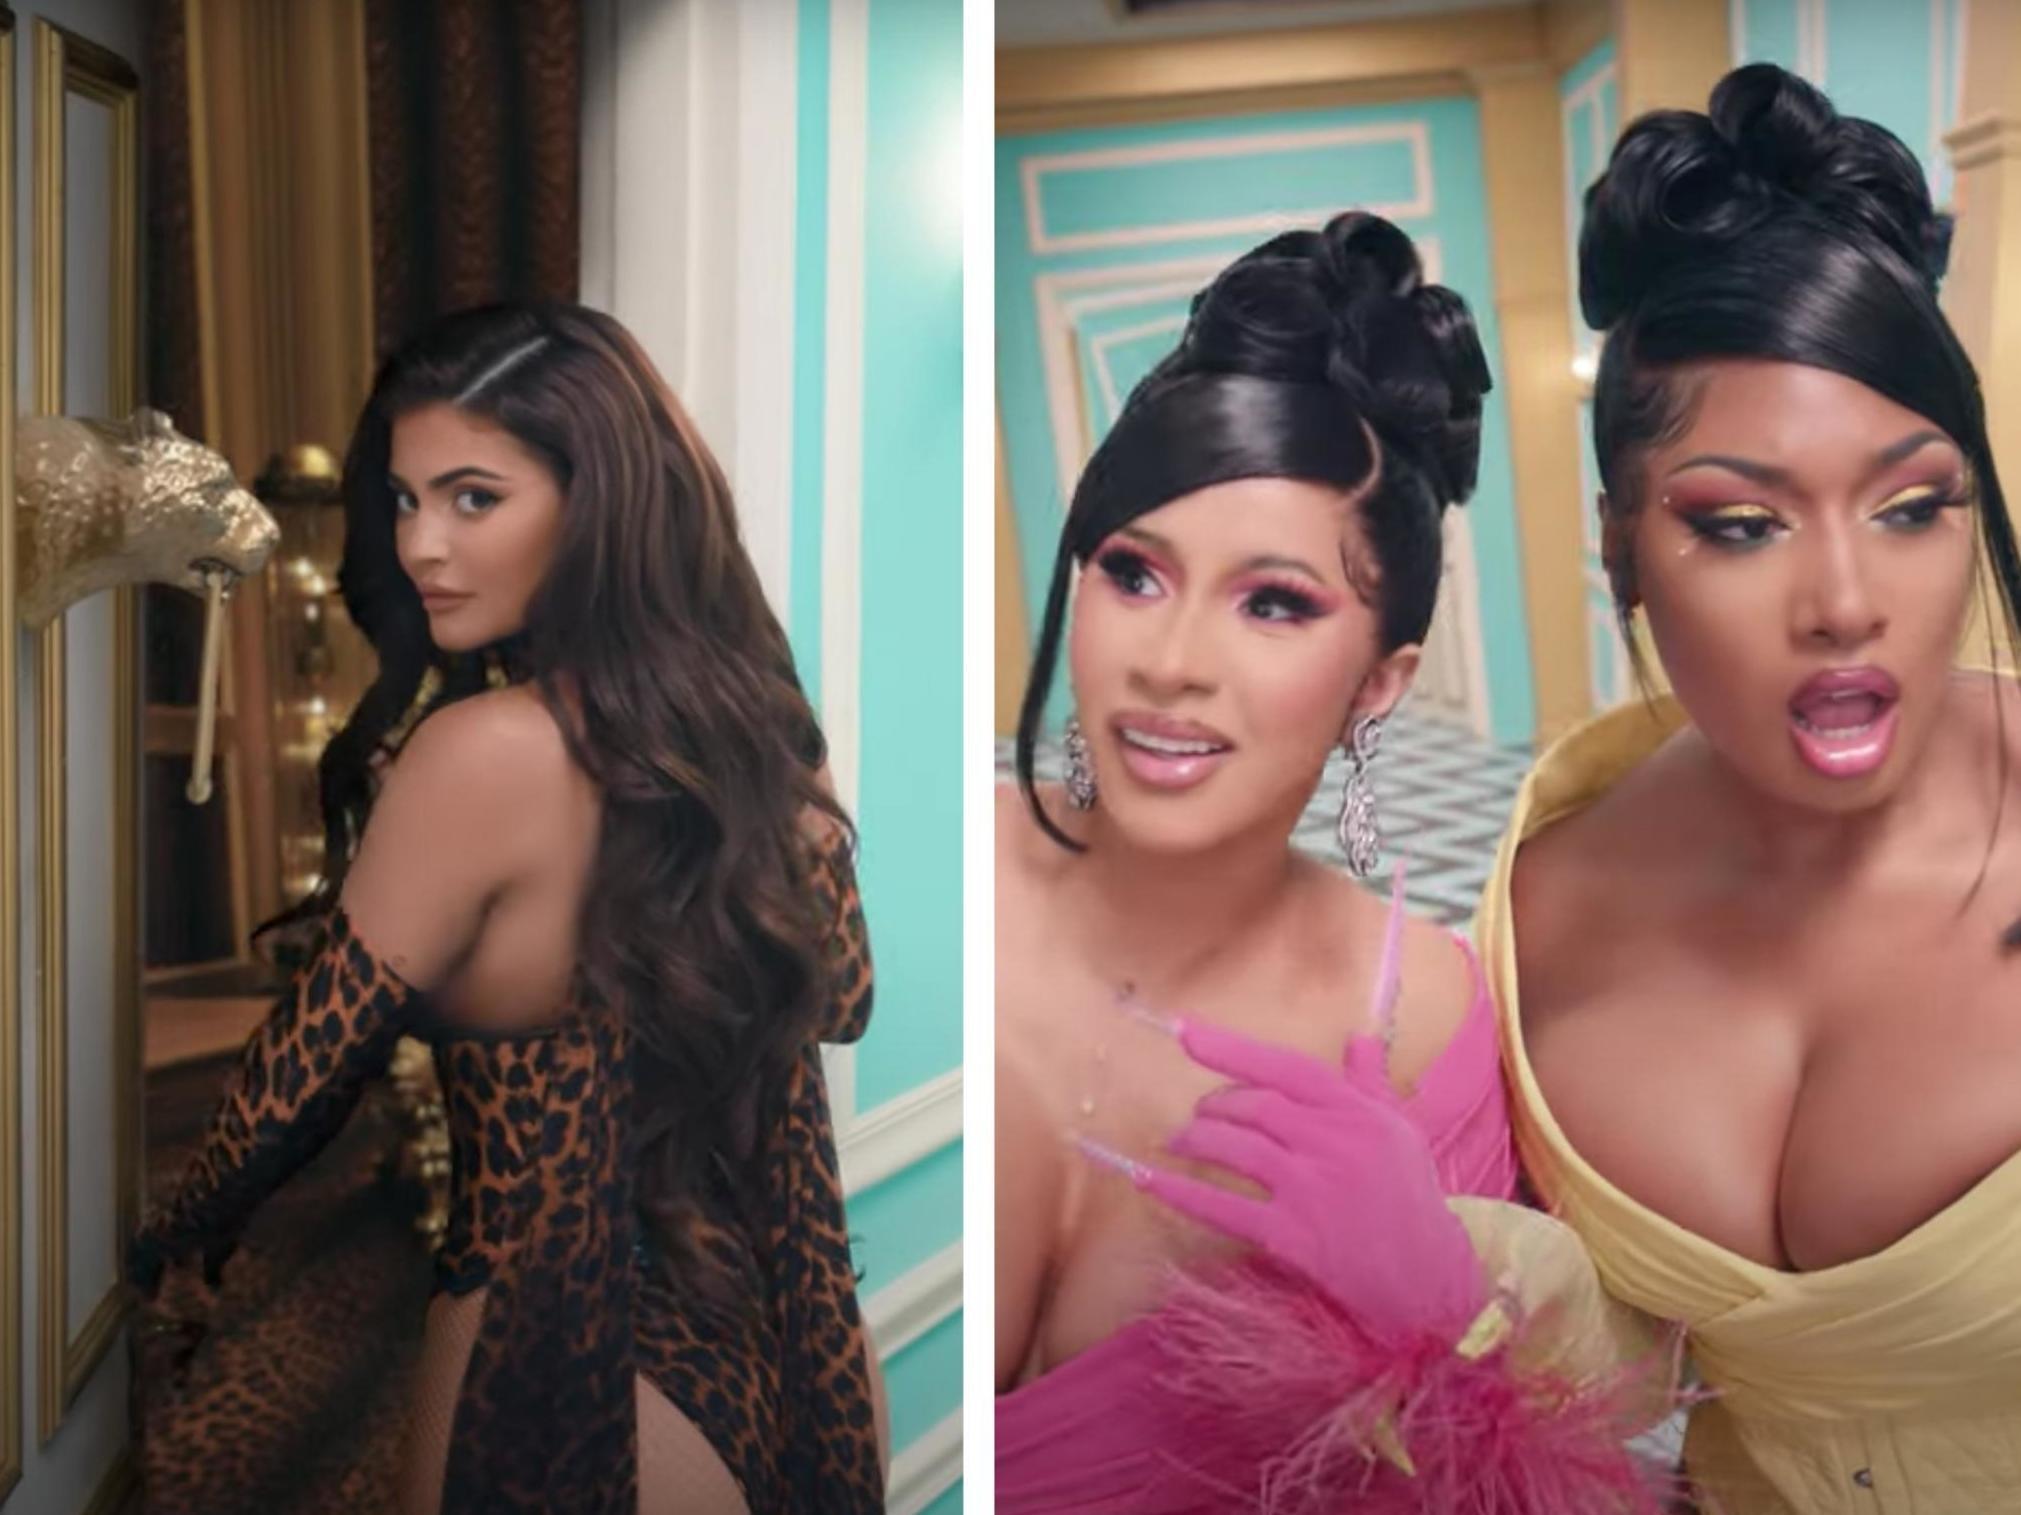 Cardi B And Megan Thee Stallion Release Wap Music Video With Kylie Jenner And Normani Cameos The Independent The Independent - wap roblox id code cardi b and megan thee stallion